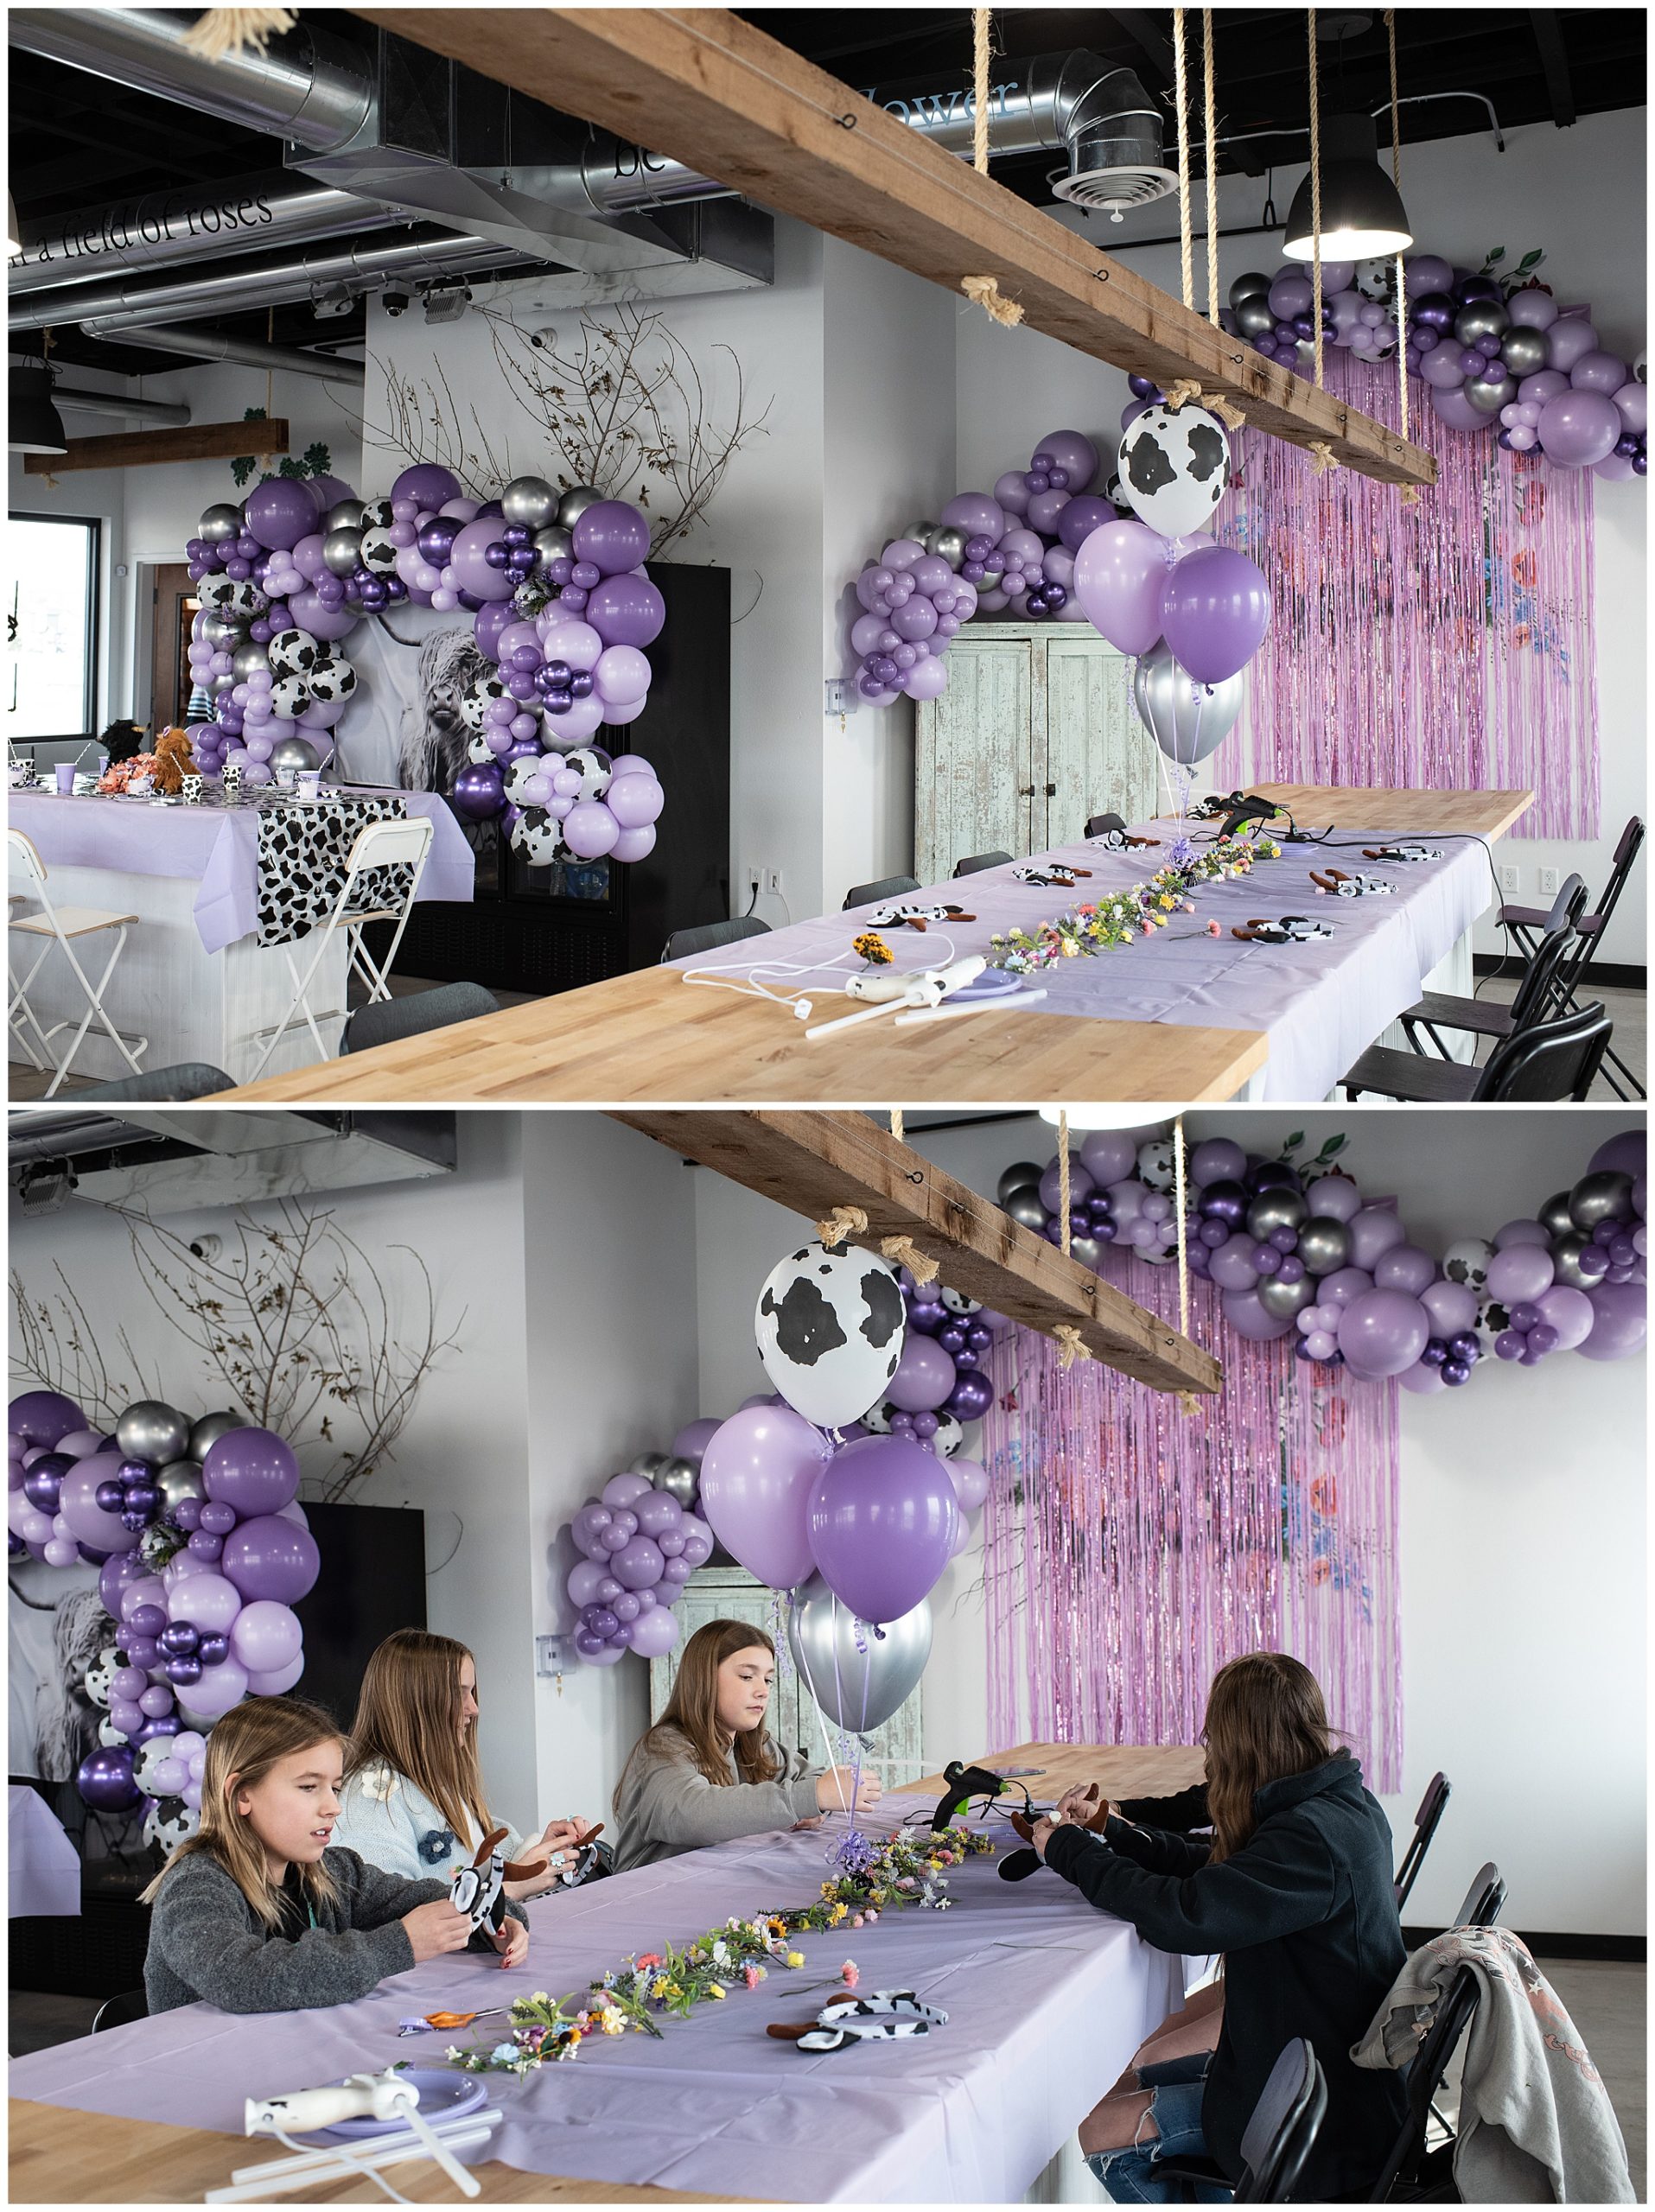 four girls sit at a table making headbands at a purple cow themed birthday party